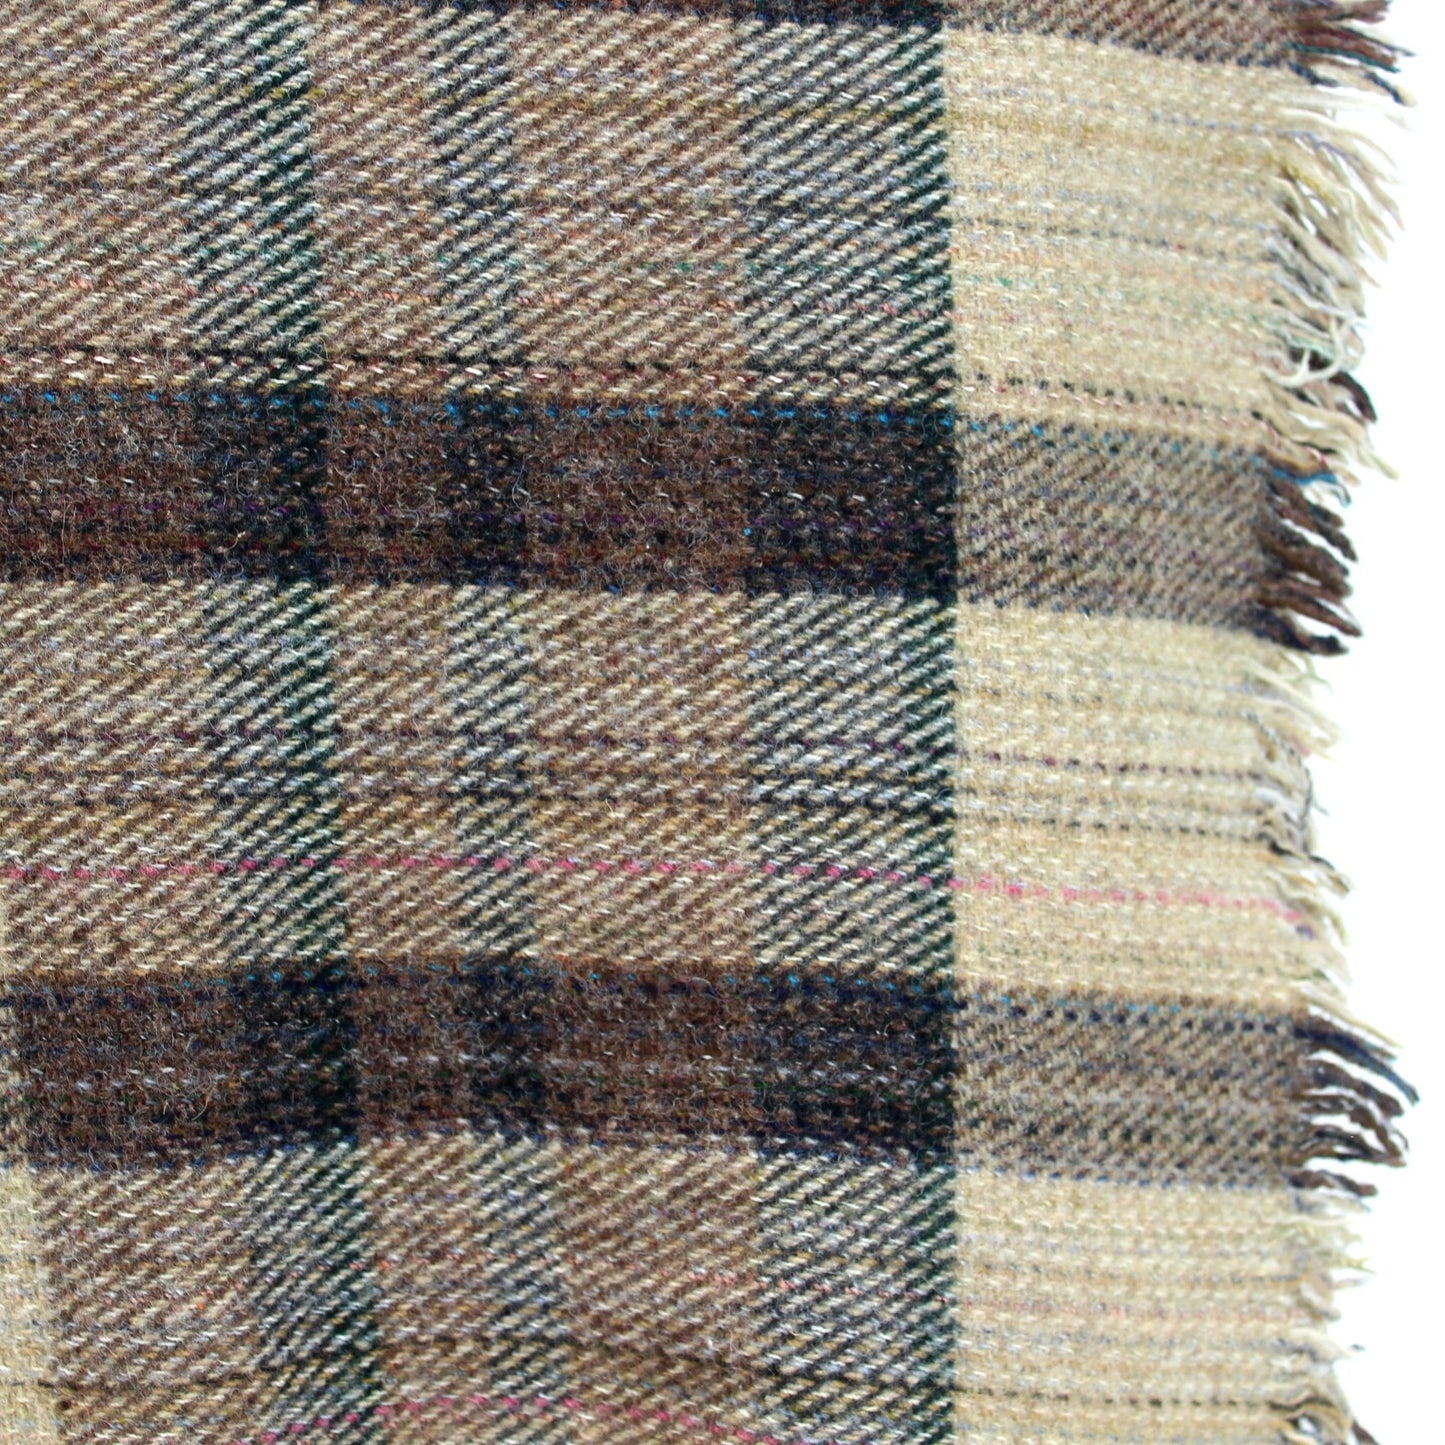 Highland Home Wool Throw Blanket Scotland Plaid Brown Beige Blue Lavender closeup view of colors